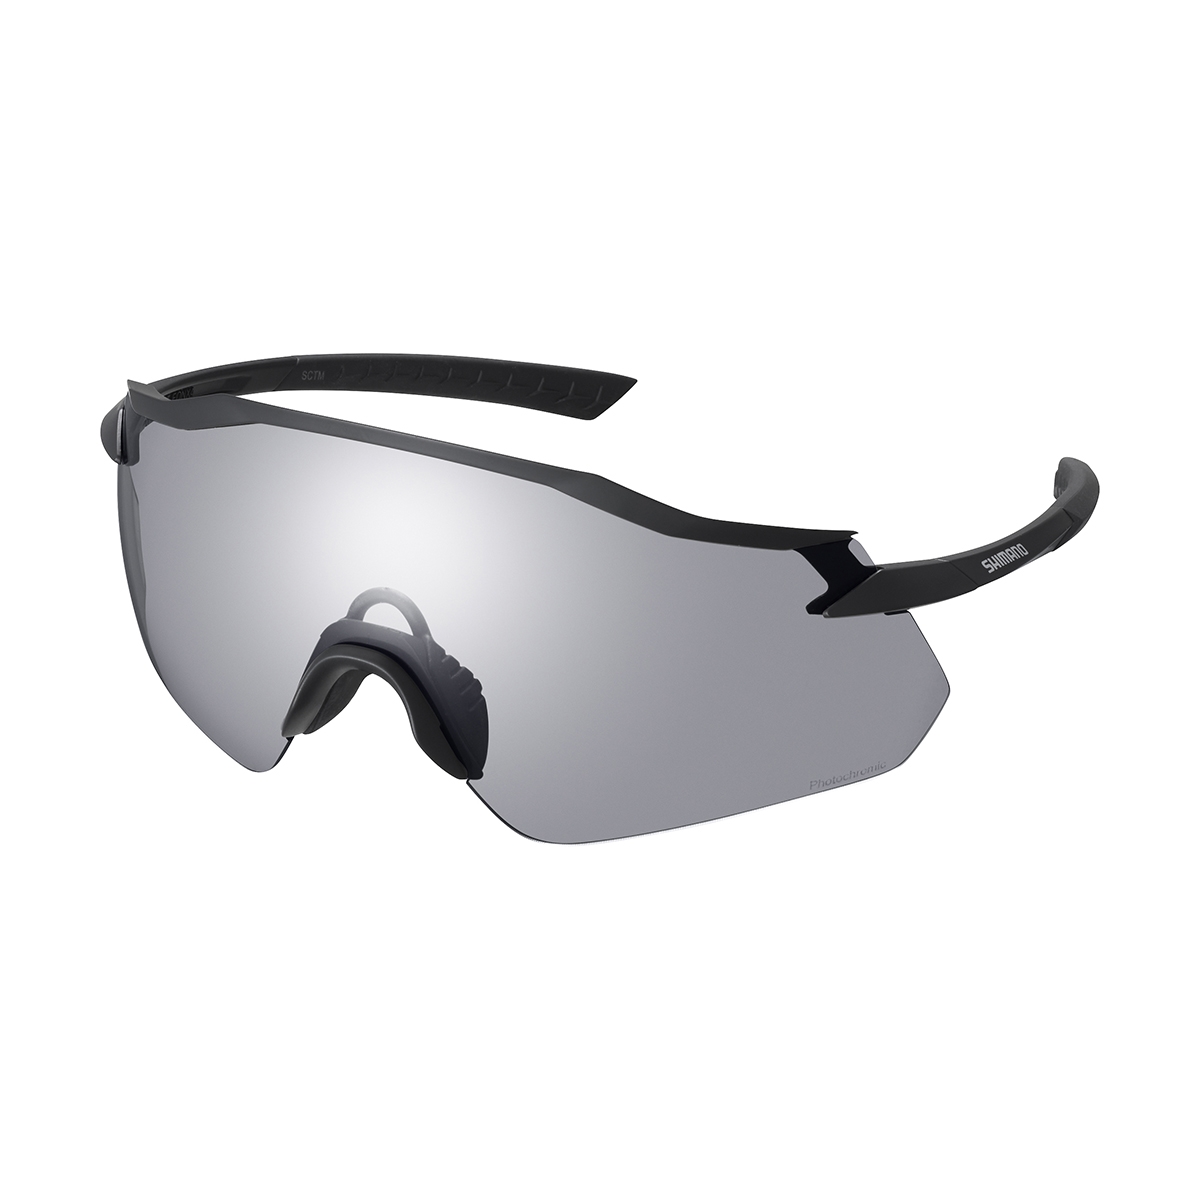 CE-EQNX4 Equinox Glasses Gray with Black Photochromic Lens